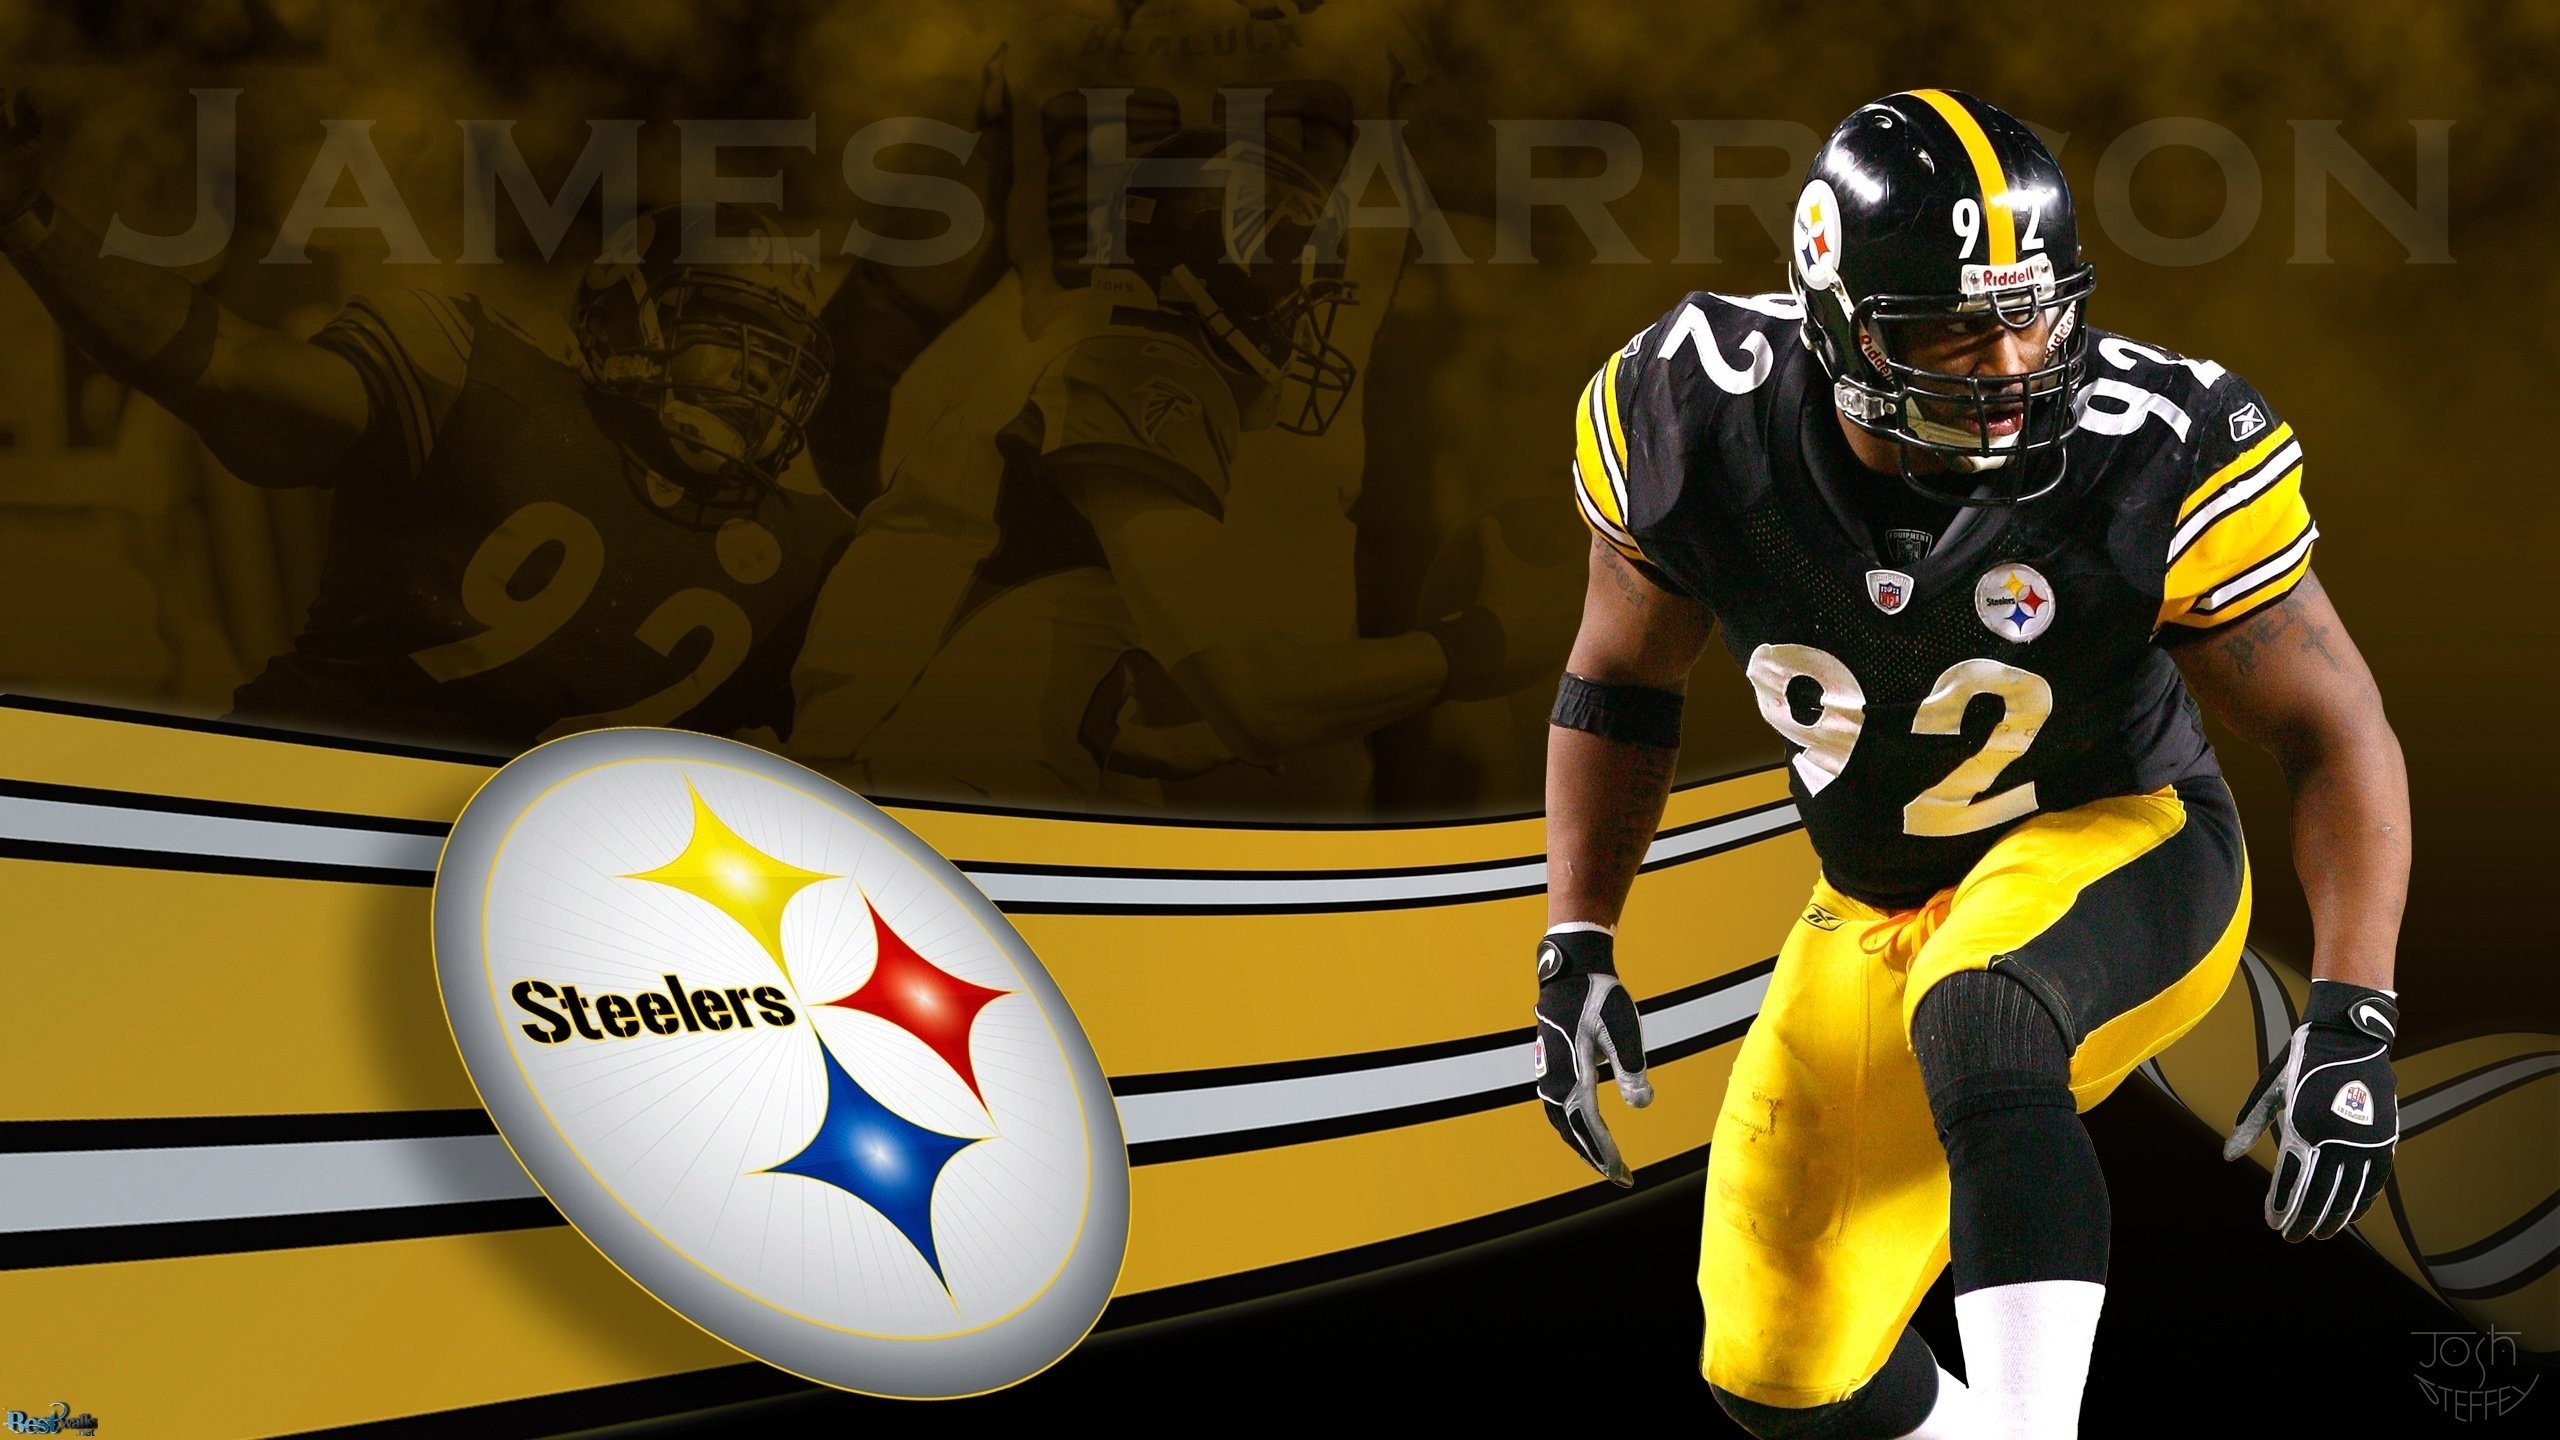 Download James Harrison Live Wallpaper for Android – Appszoom